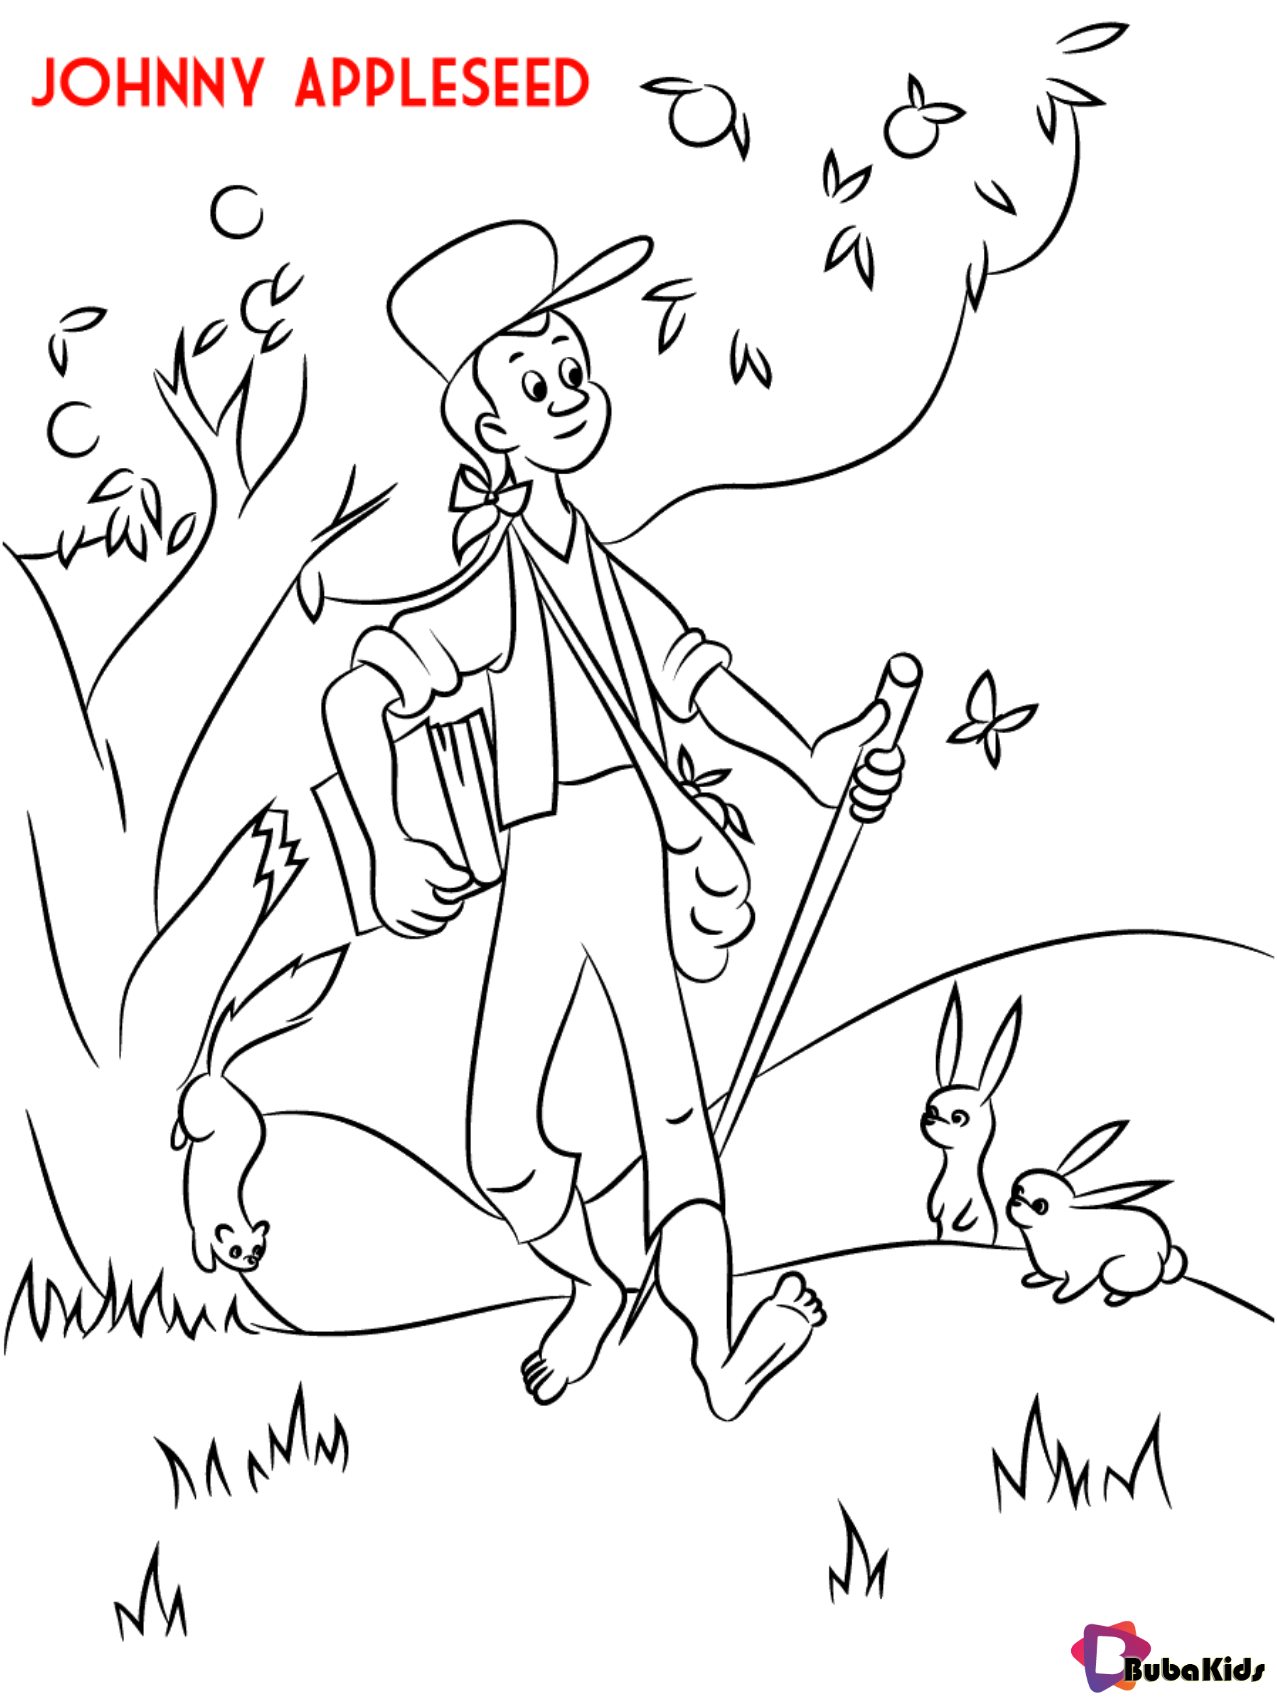 Johnny Appleseed coloring pages for kids